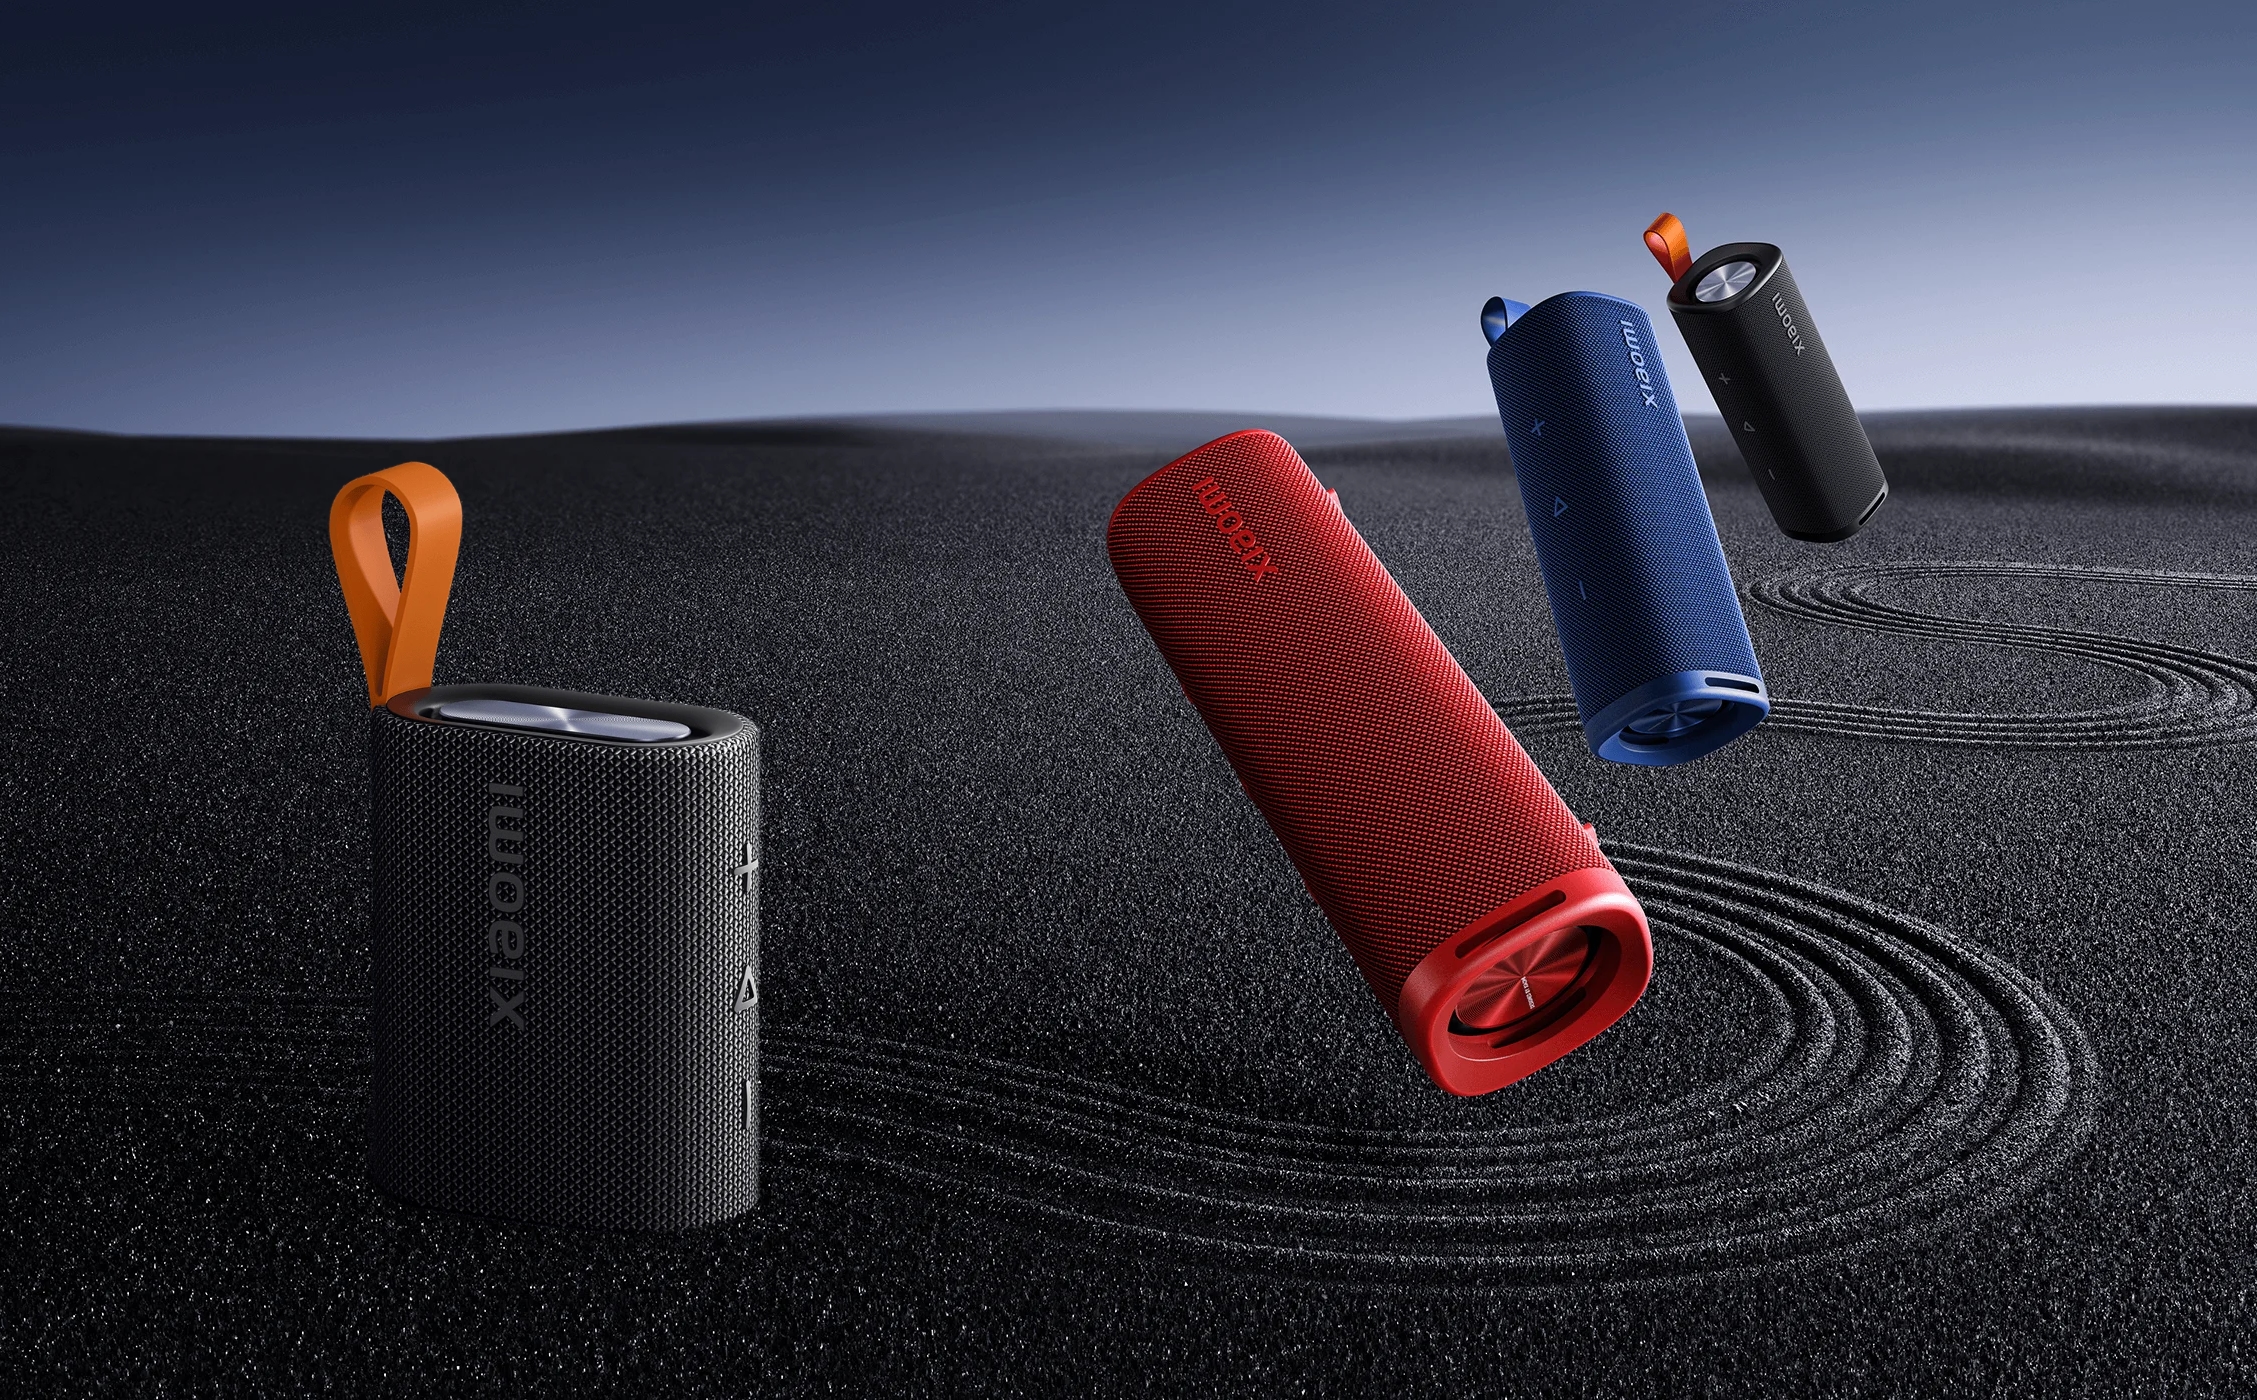 Xiaomi has introduced two new Bluetooth speakers with IP67 protection and up to 12 hours of battery life to the global market